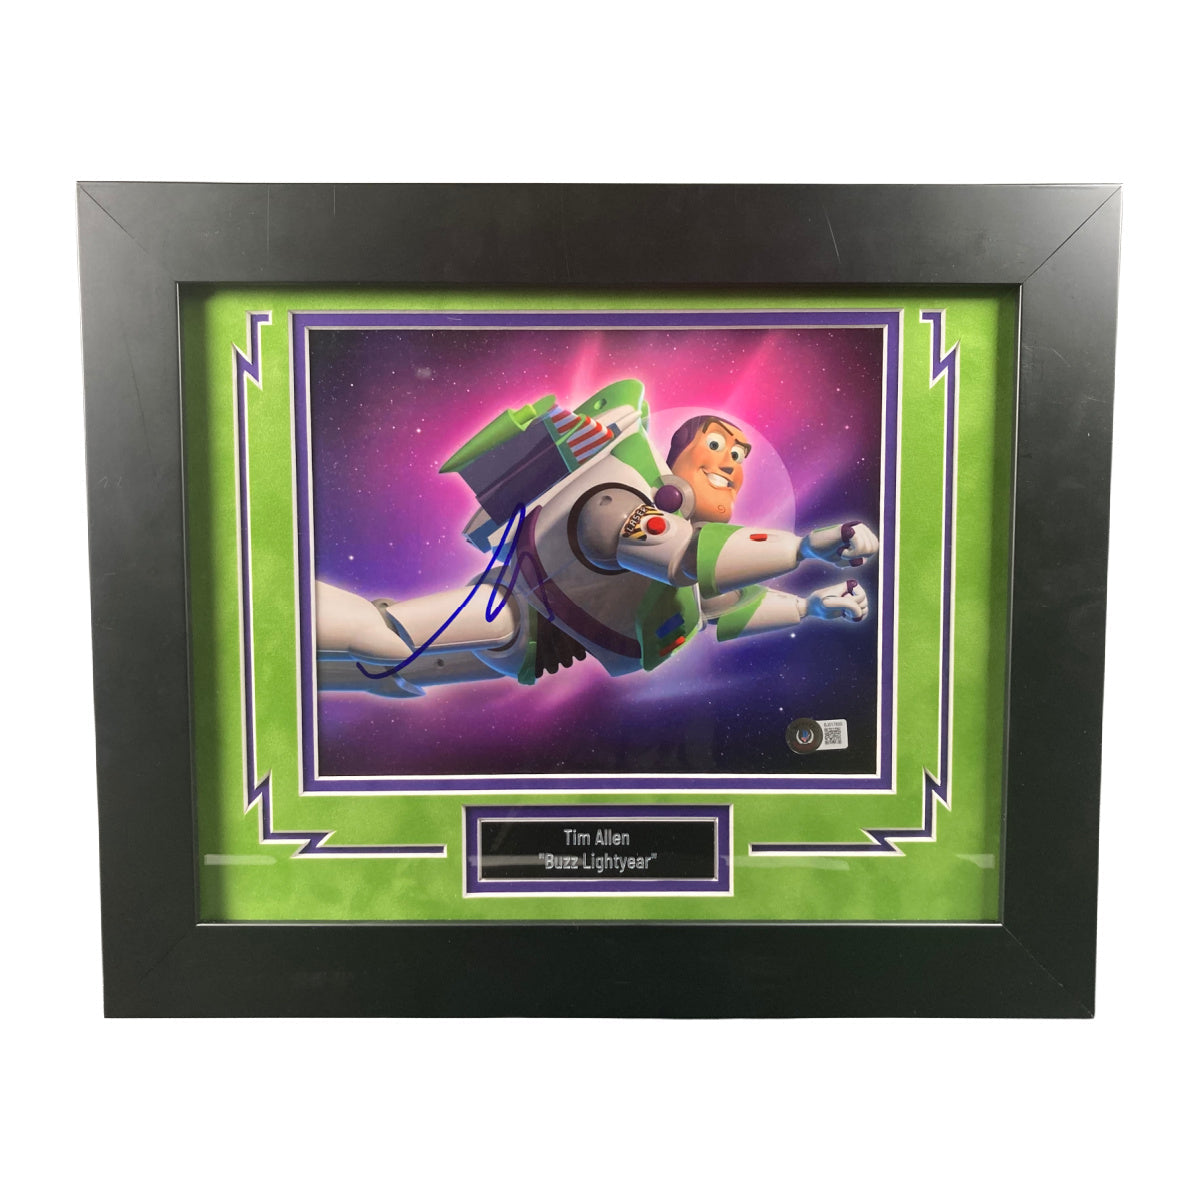 Tim Allen Signed 8x10 Photo Toy Story Framed Authentic Autographed BAS COA